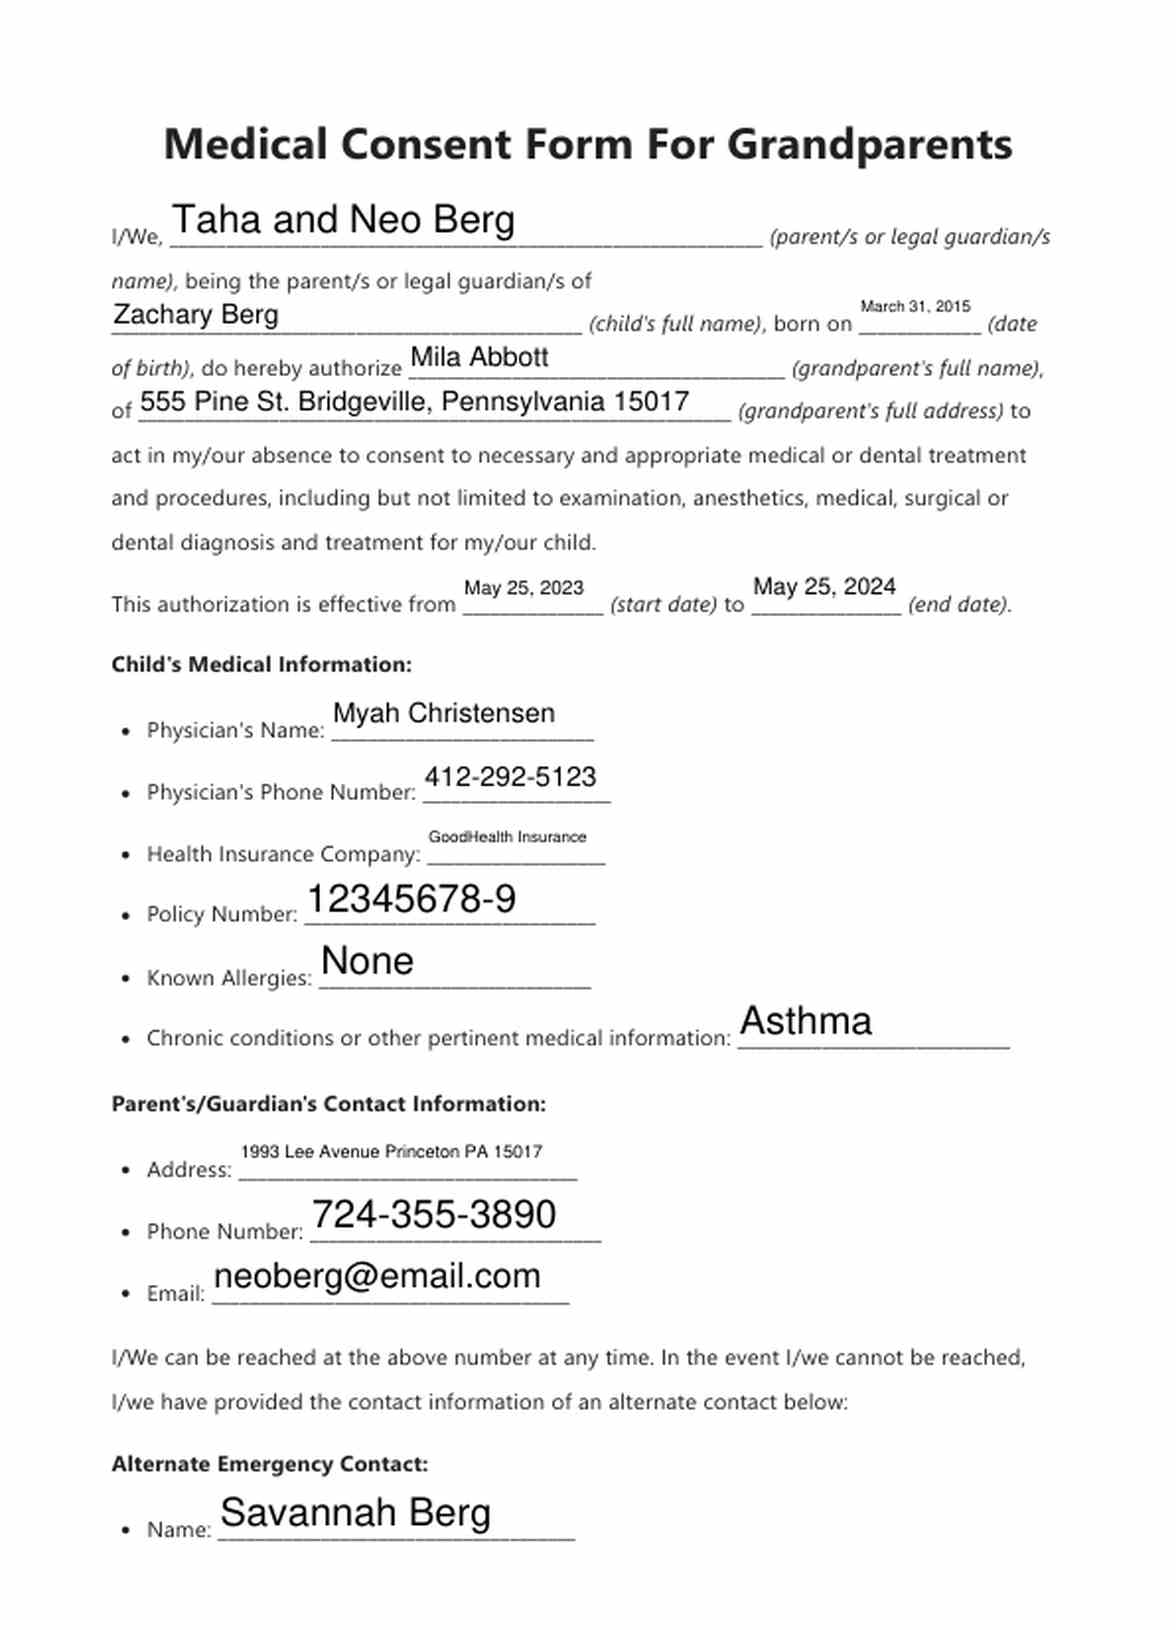 Medical Consent Form For Grandparents PDF Example